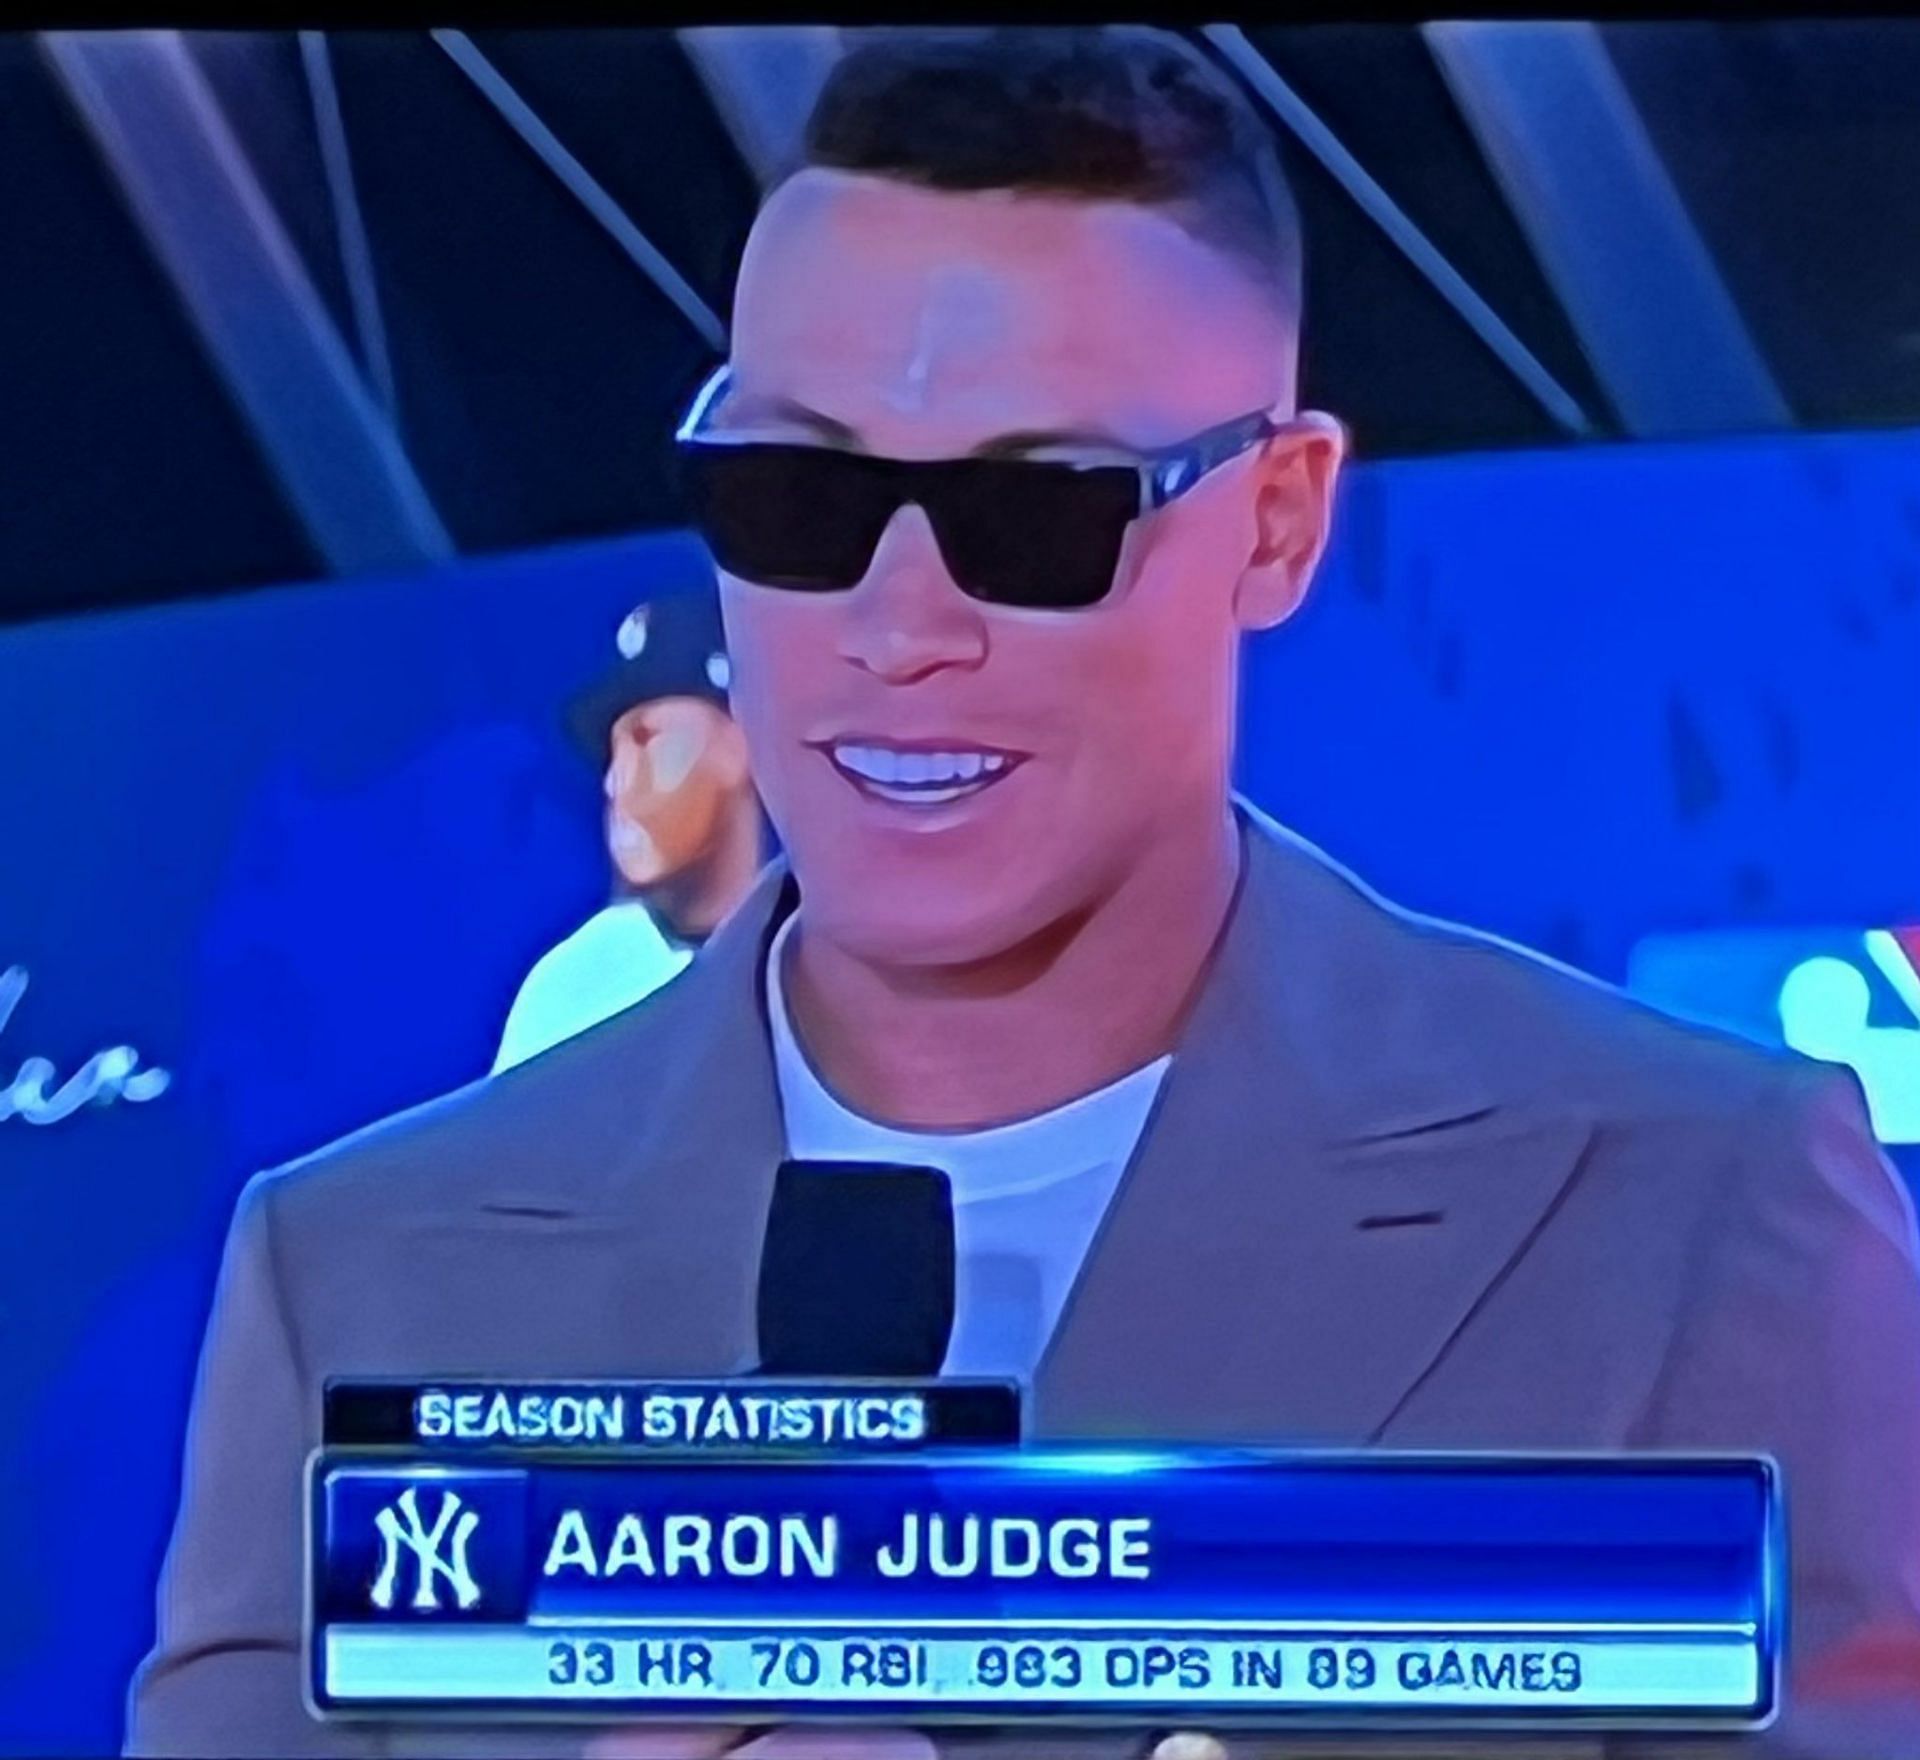 The Yankees won the ASG red carpet Trevino looks hot - Fans